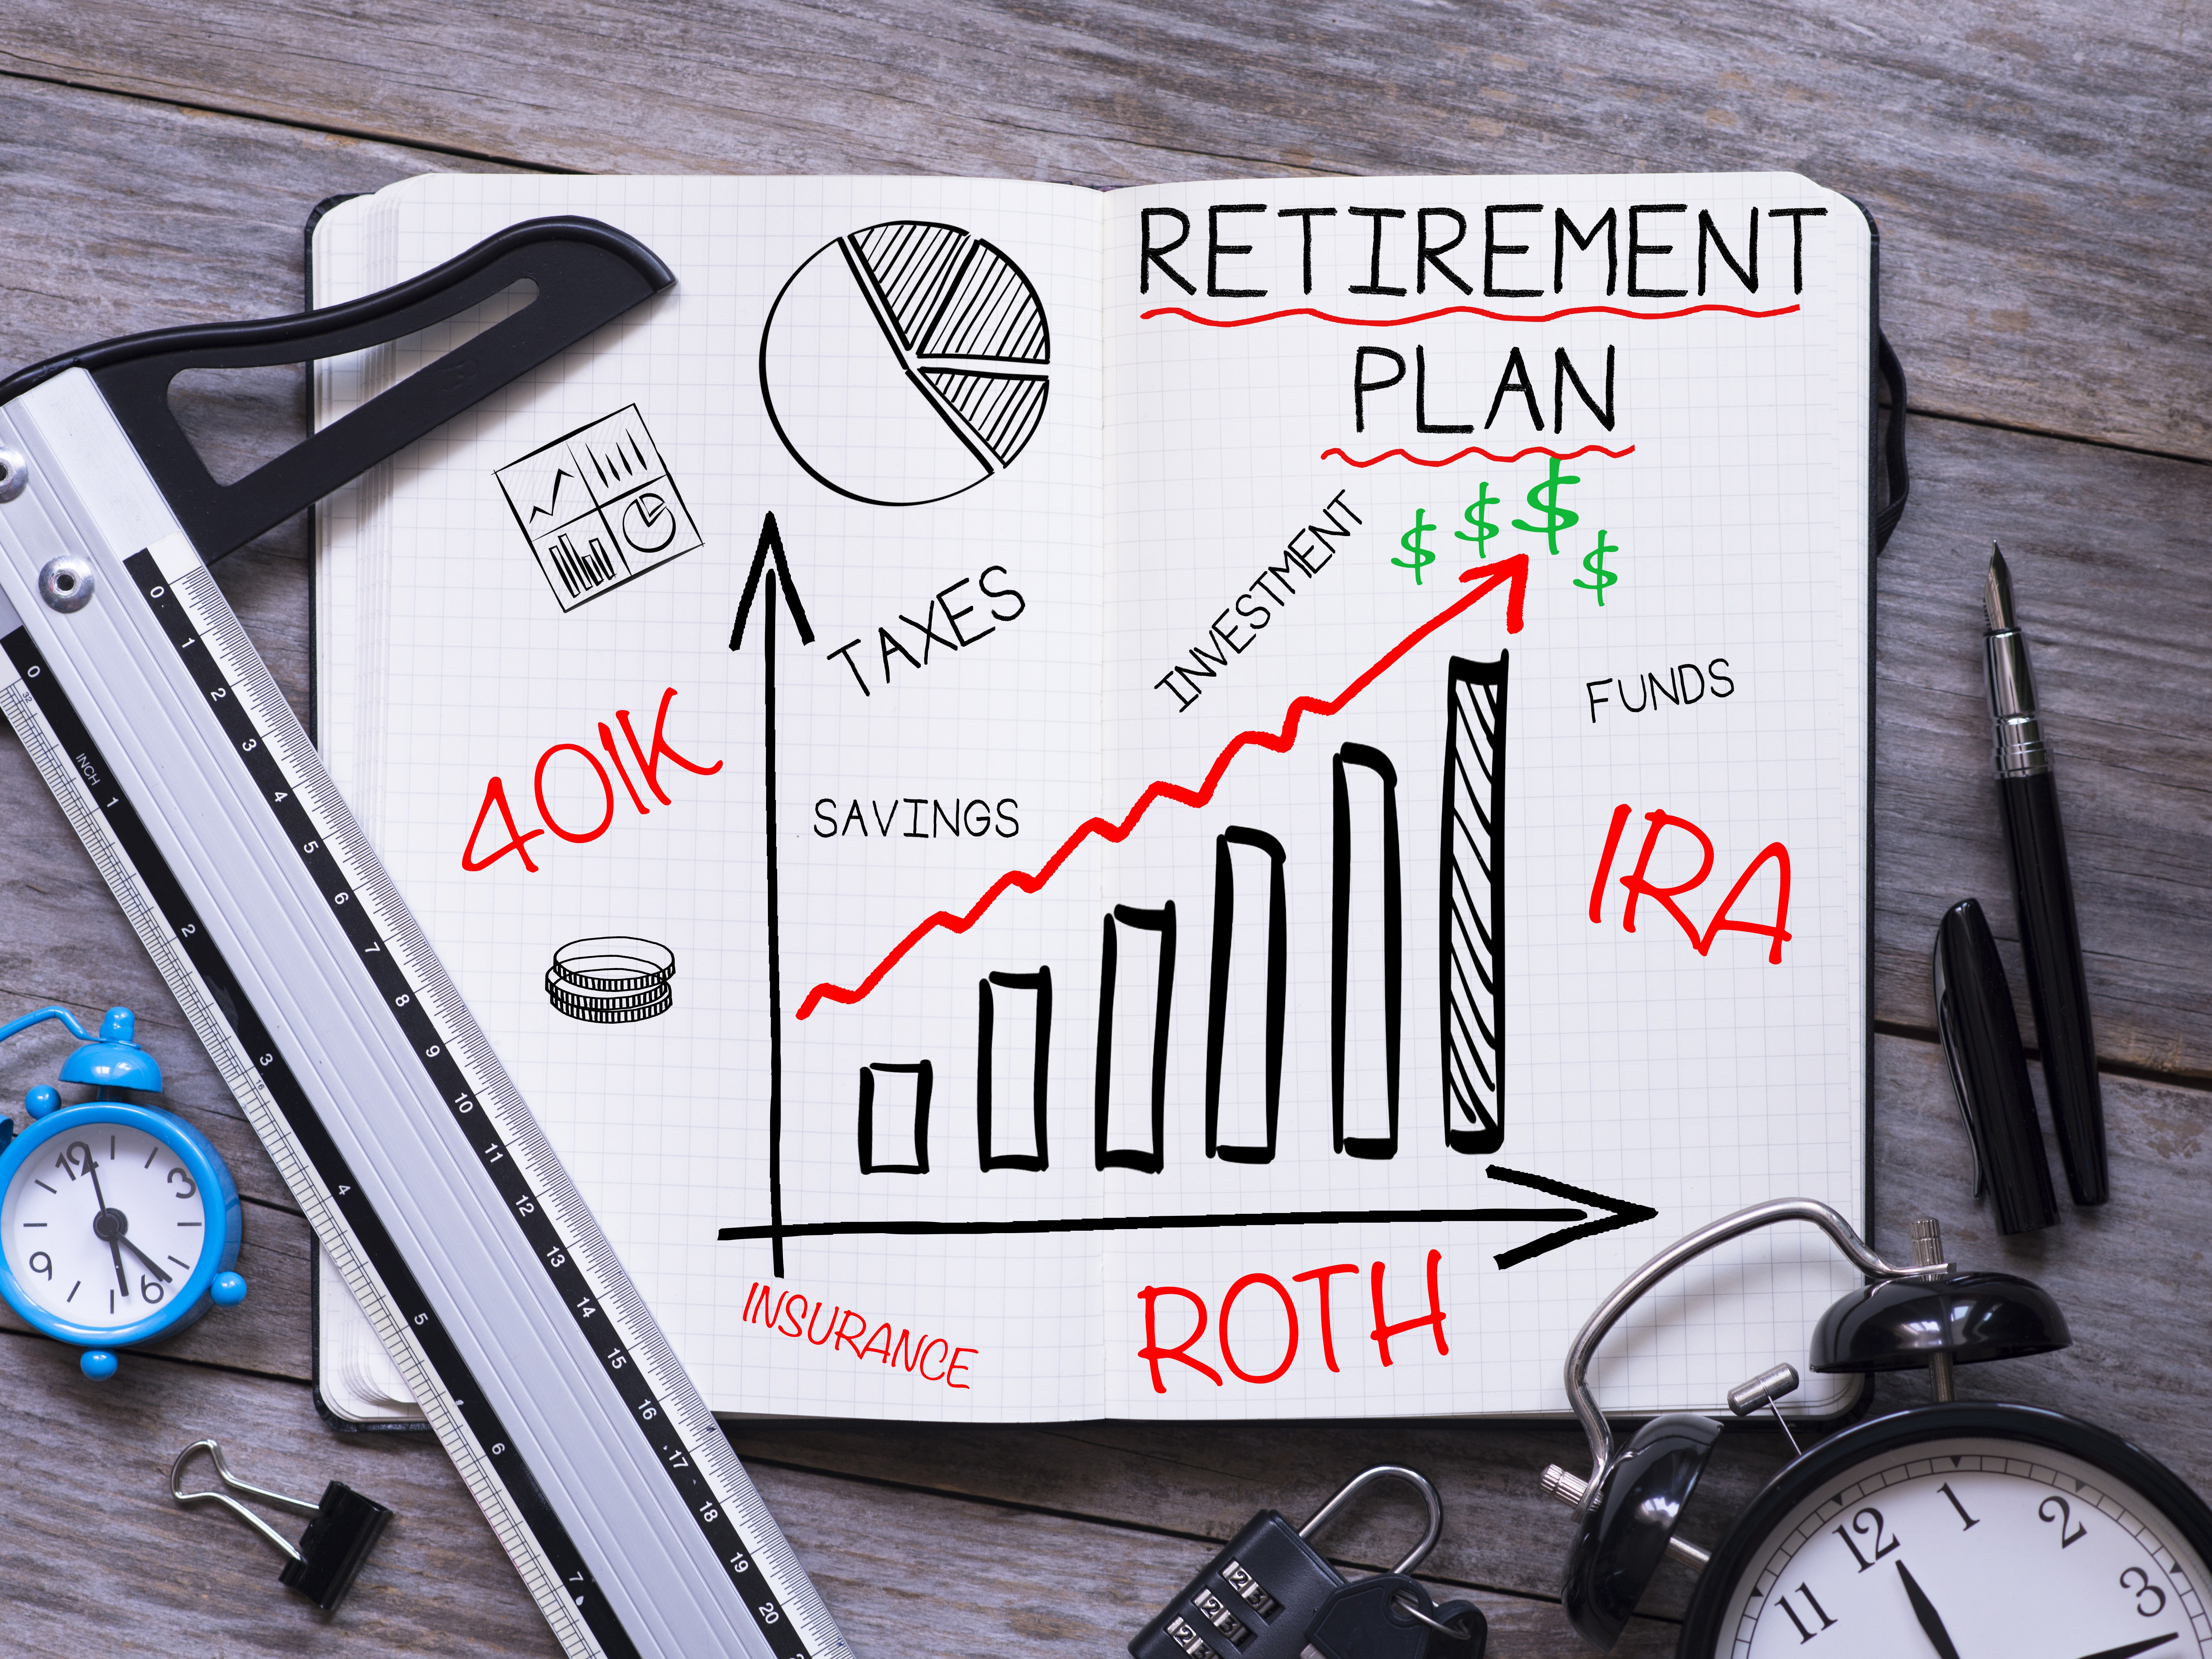 All About Simplify Your Retirement With An Ira Rollover